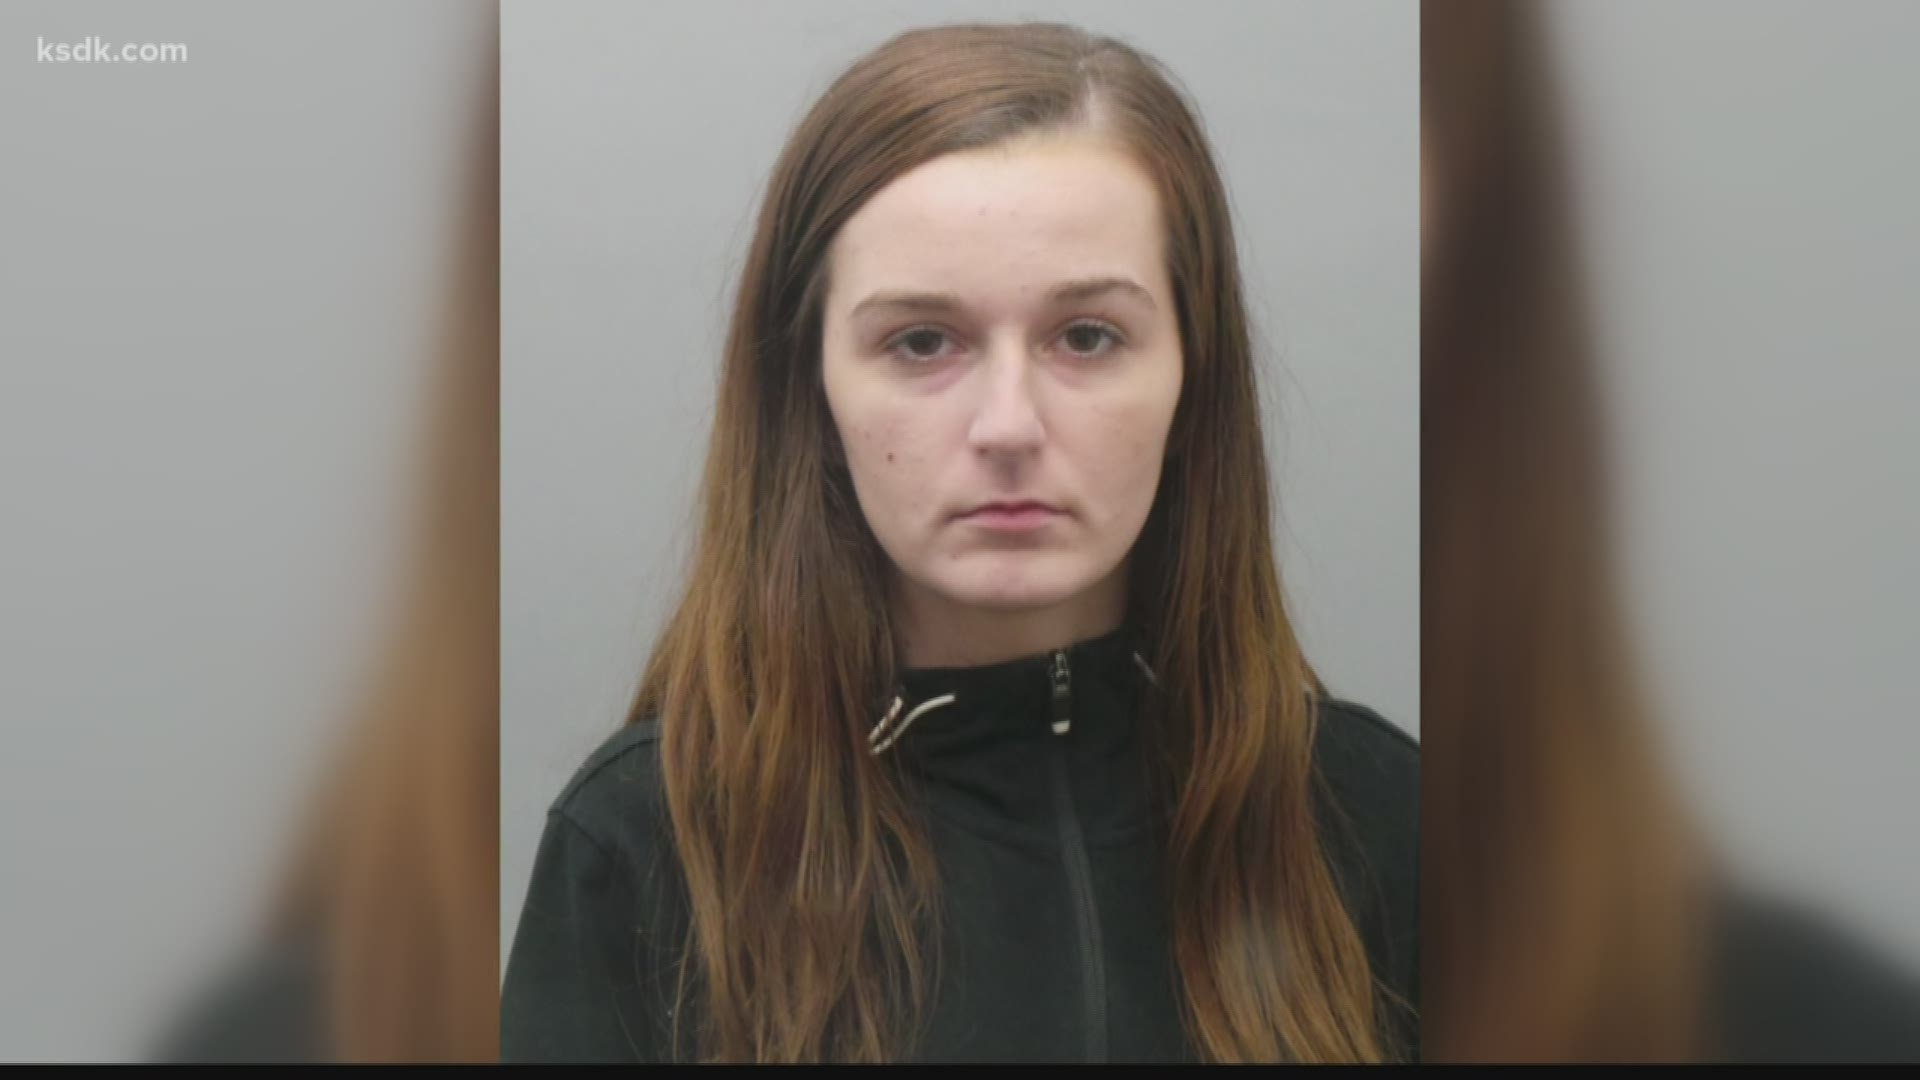 Ajla Zekan, 21, of St. Louis was arrested by St. Louis County Police during a traffic stop on Saturday.